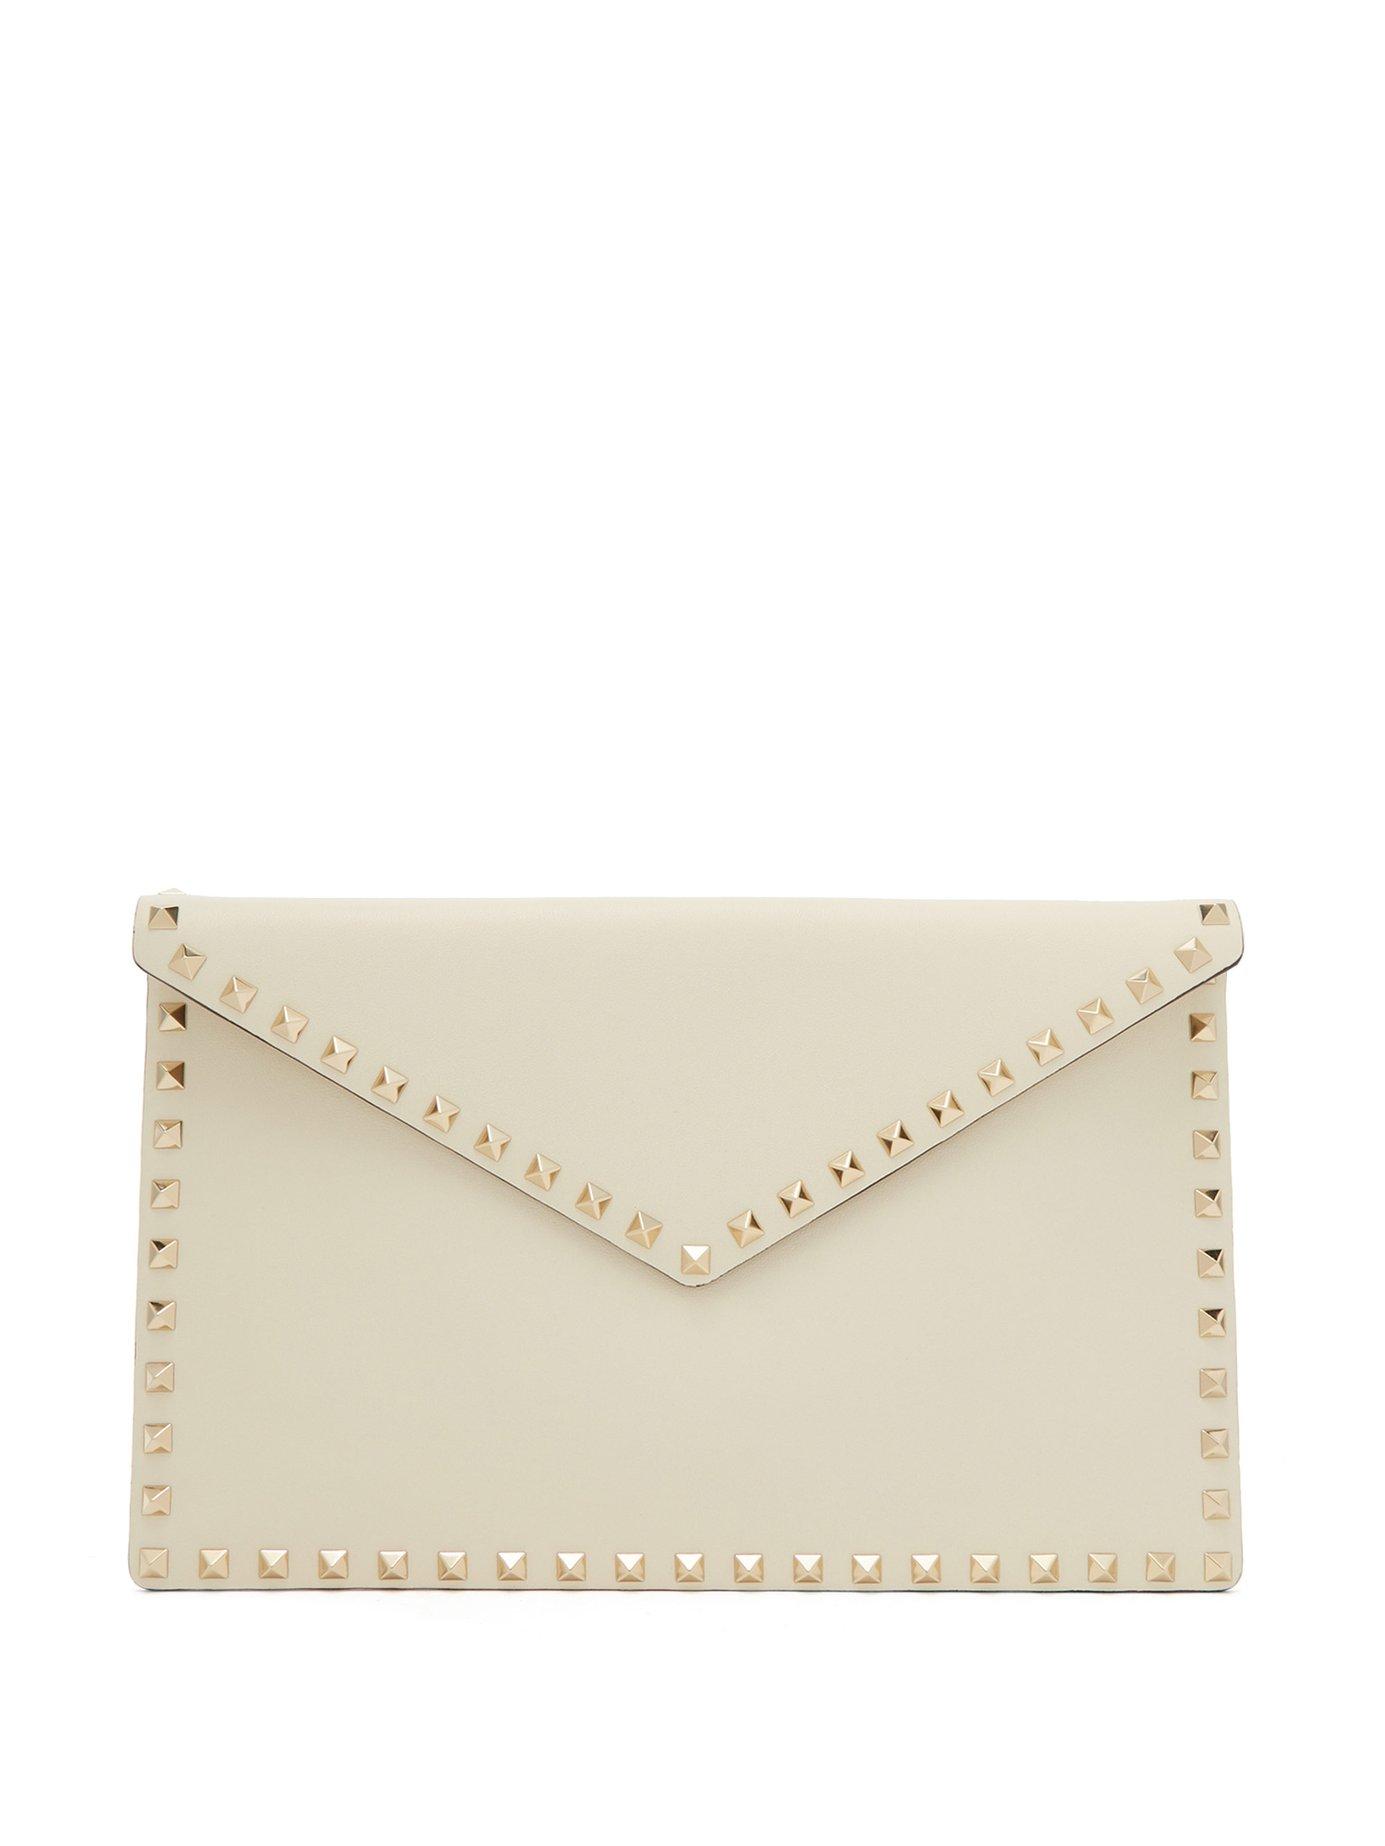 Valentino Rockstud Large Envelope Clutch in White - Lyst